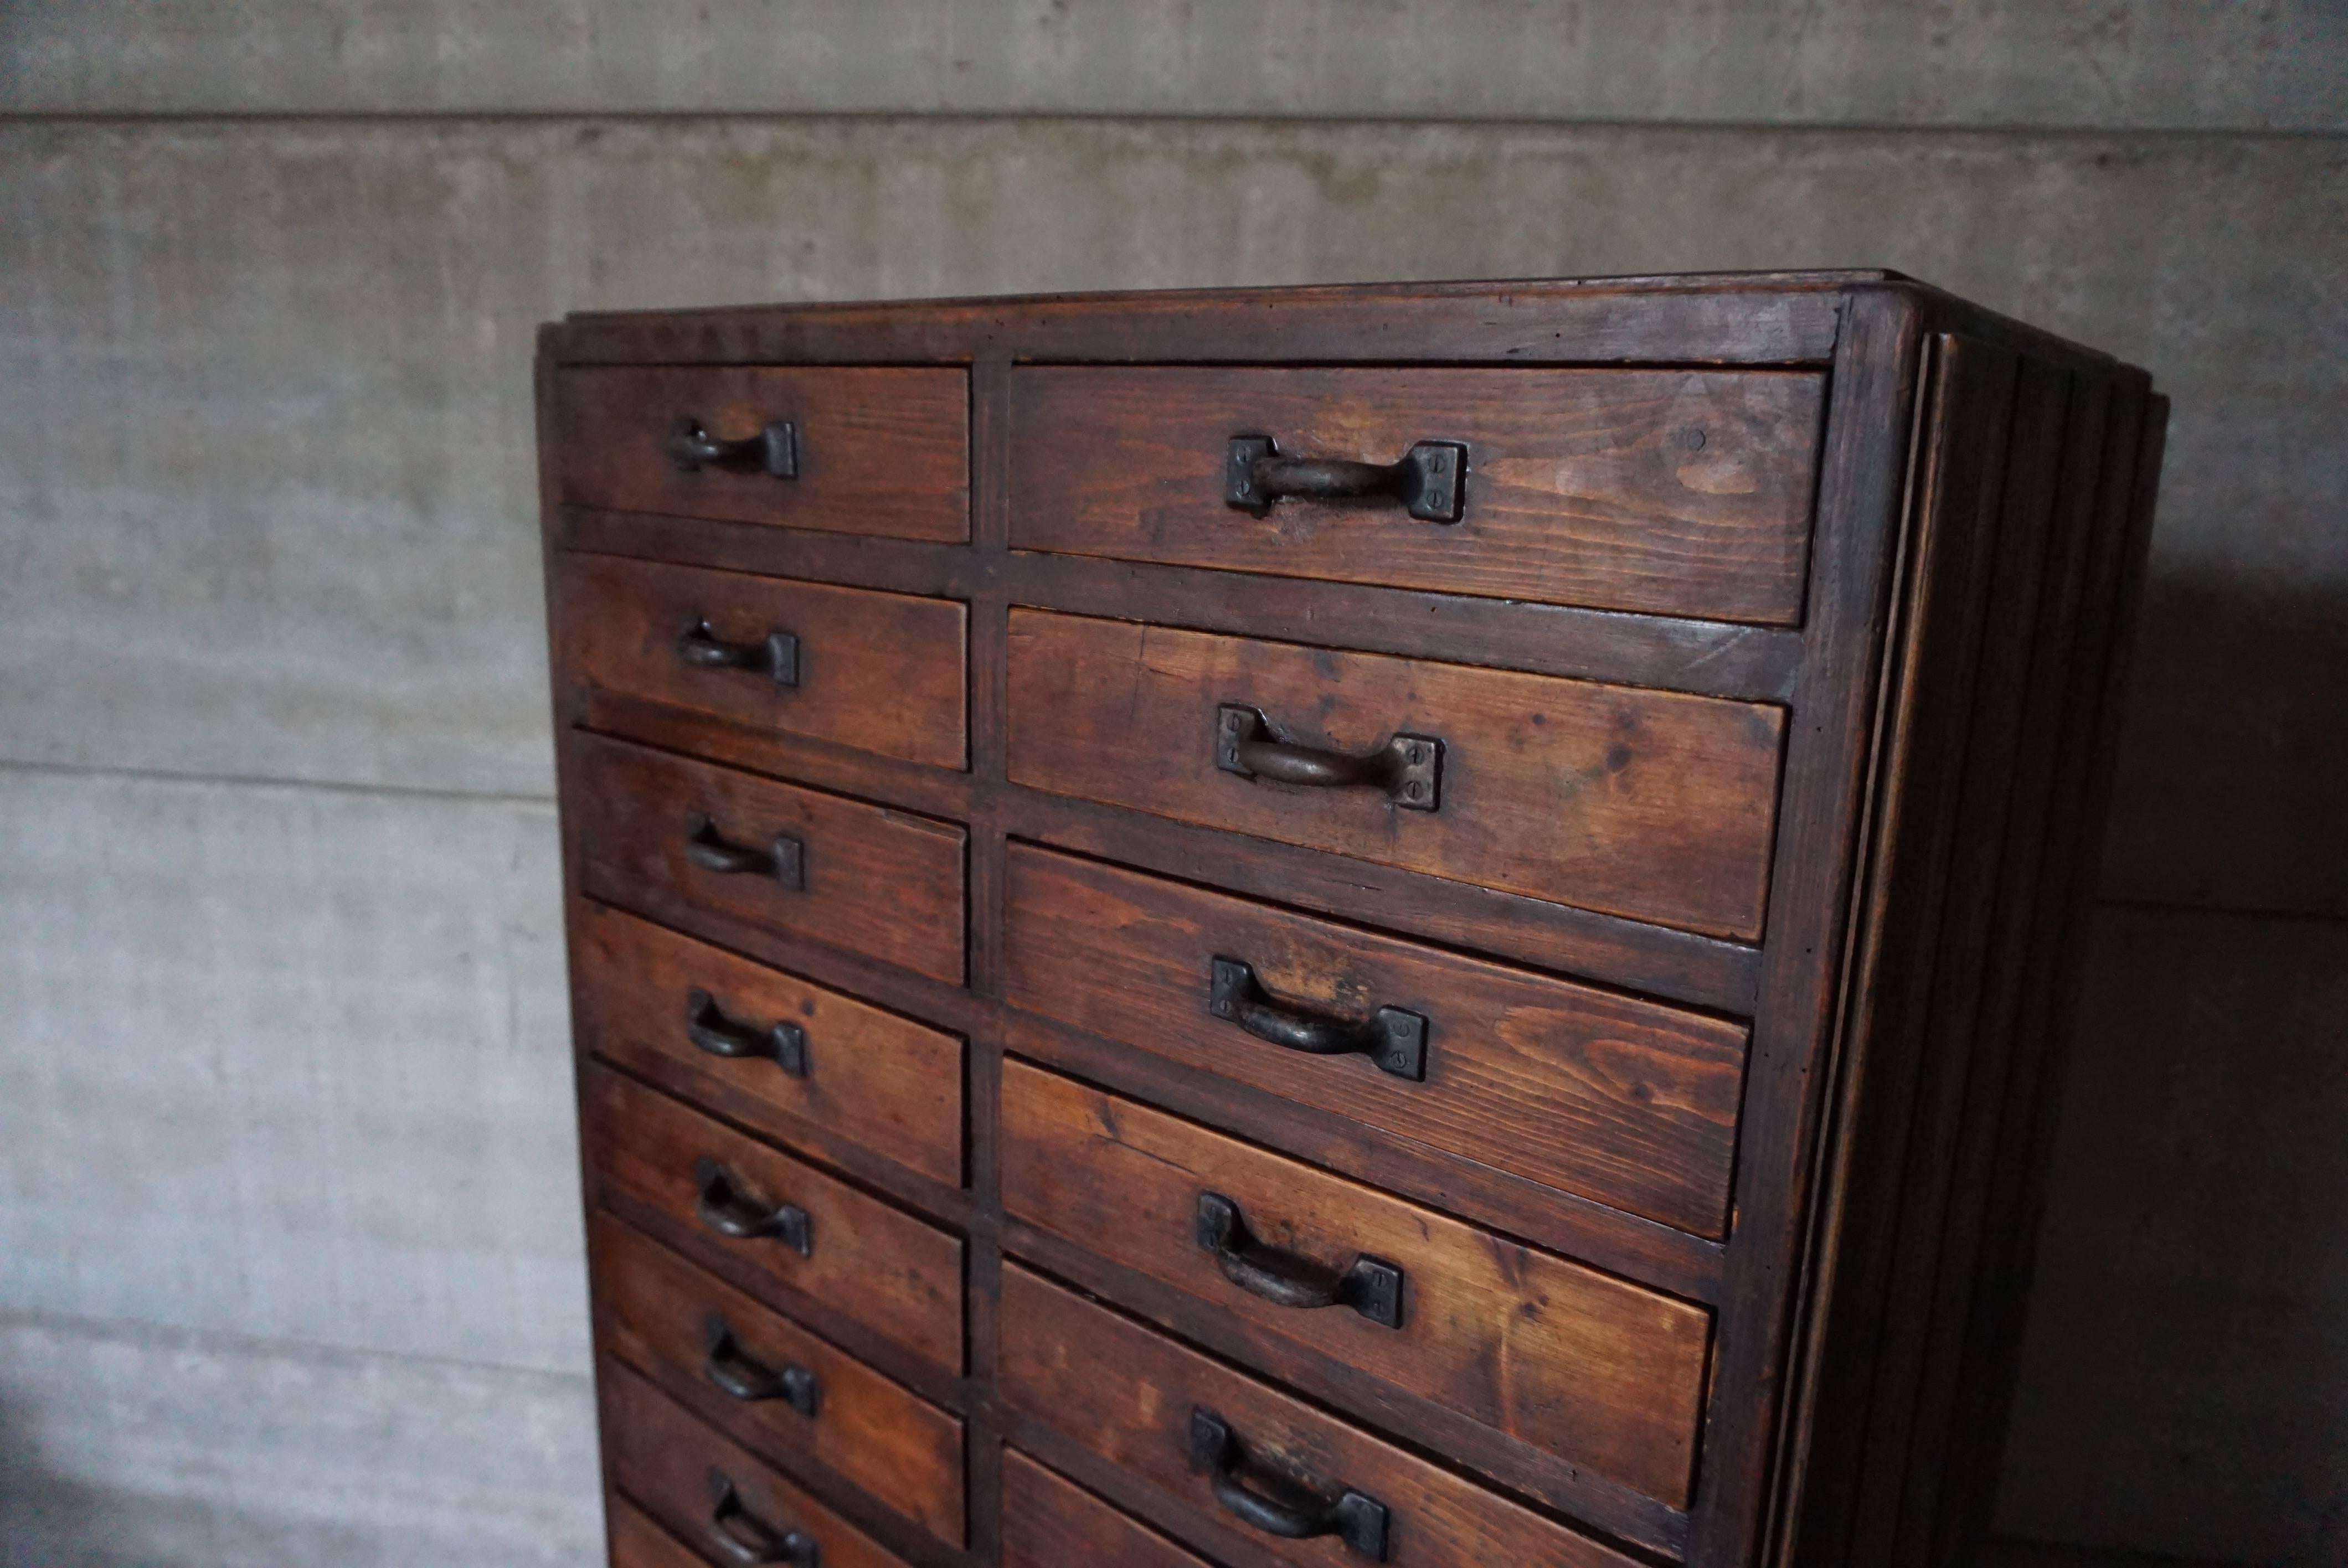 This industrial workshop cabinet was designed during the 1920s and manufactured in the Netherlands, where it was used in a factory. It is made from pinewood and features 28 drawers, some with dividers some without. This item remains in a good